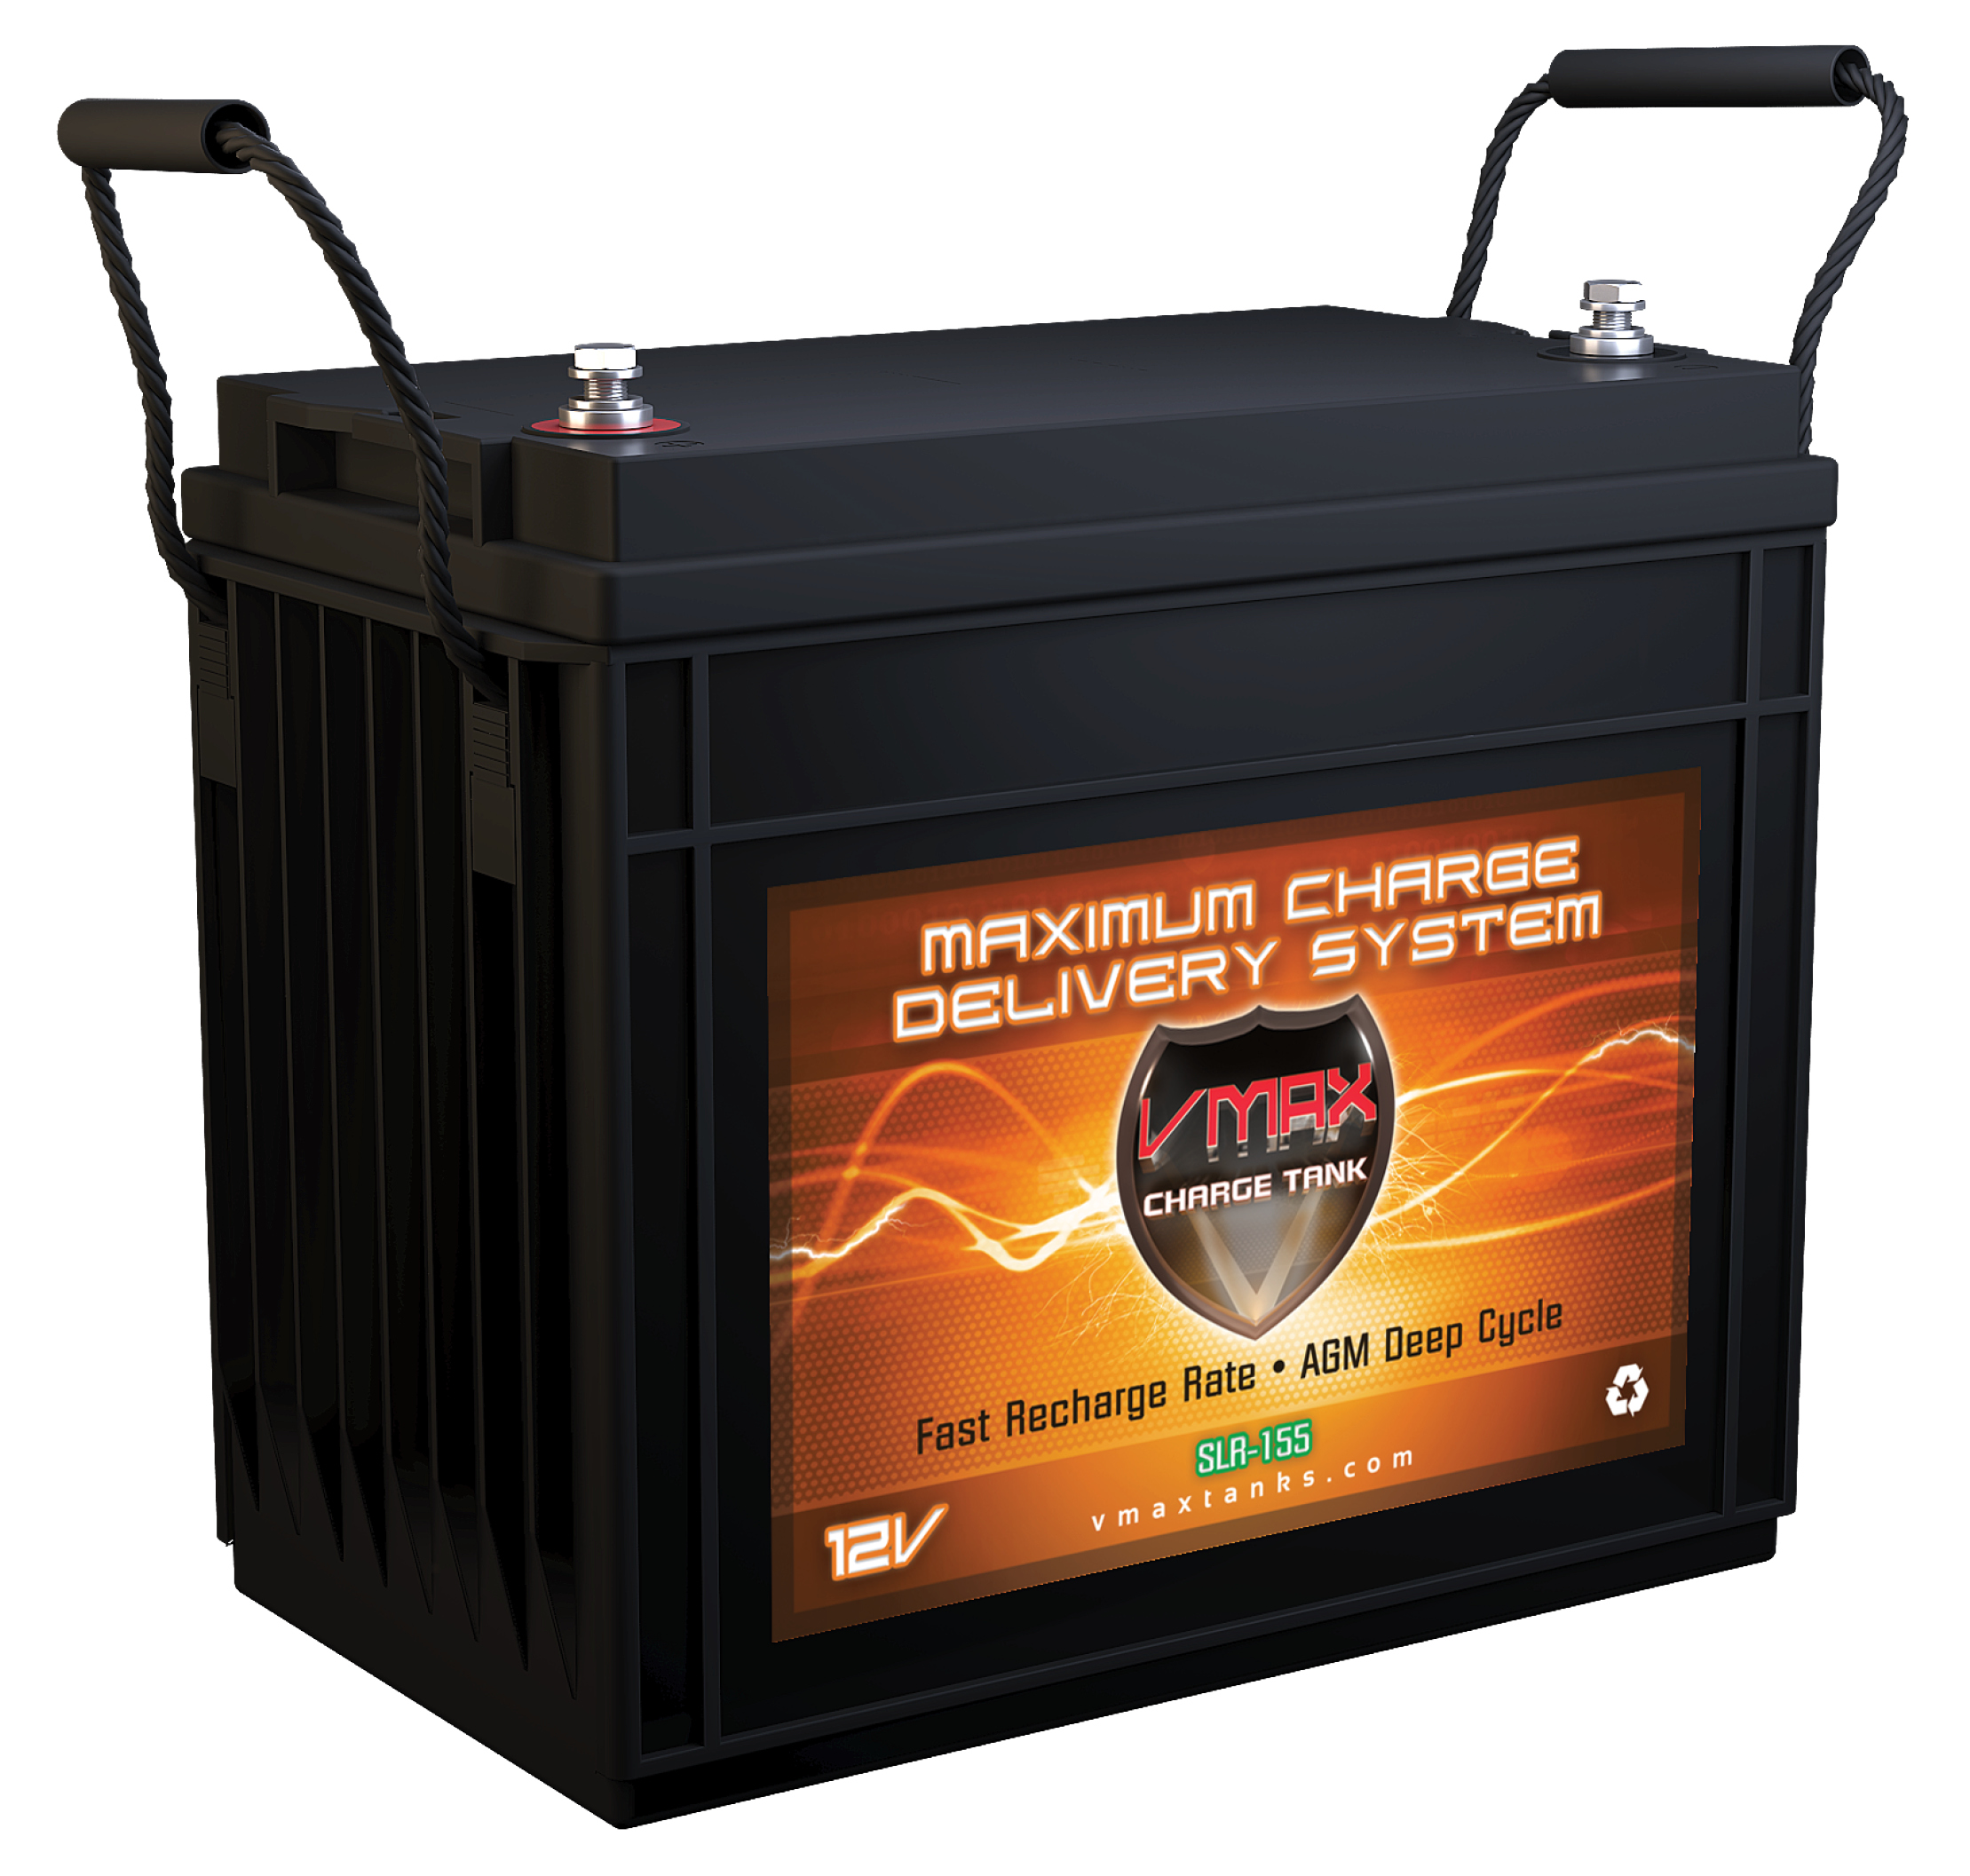 VMAX SLR155 12V AGM 155Ah Deep Cycle Rechargeable Solar Battery for use with Primus Windpower - image 1 of 1